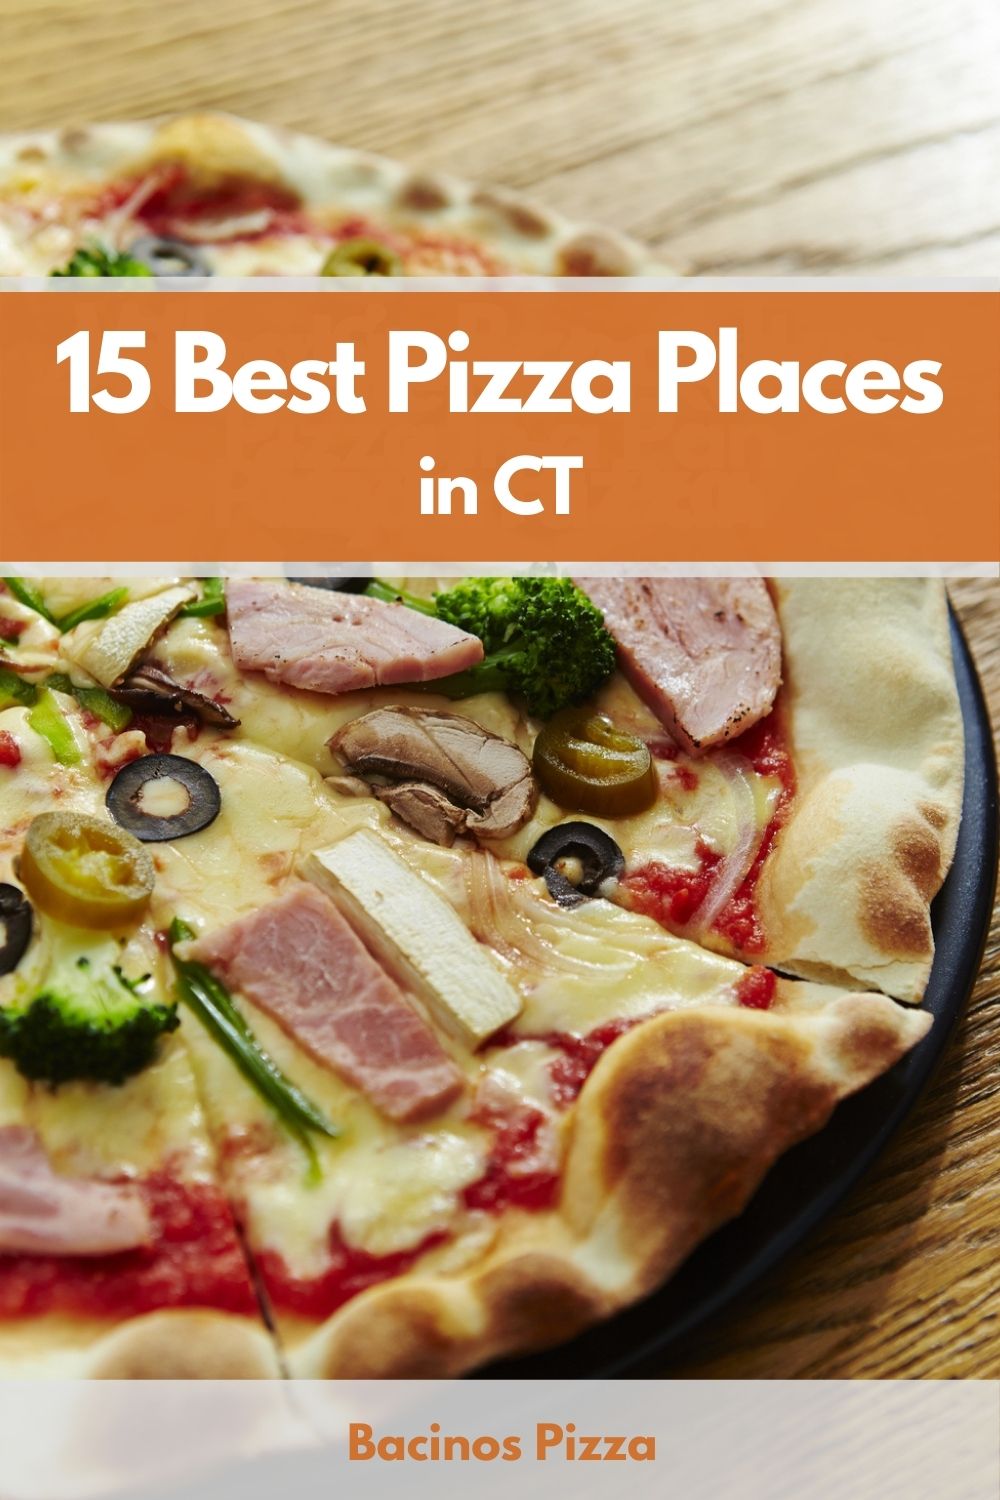 15 Best Pizza Places in CT pin 2